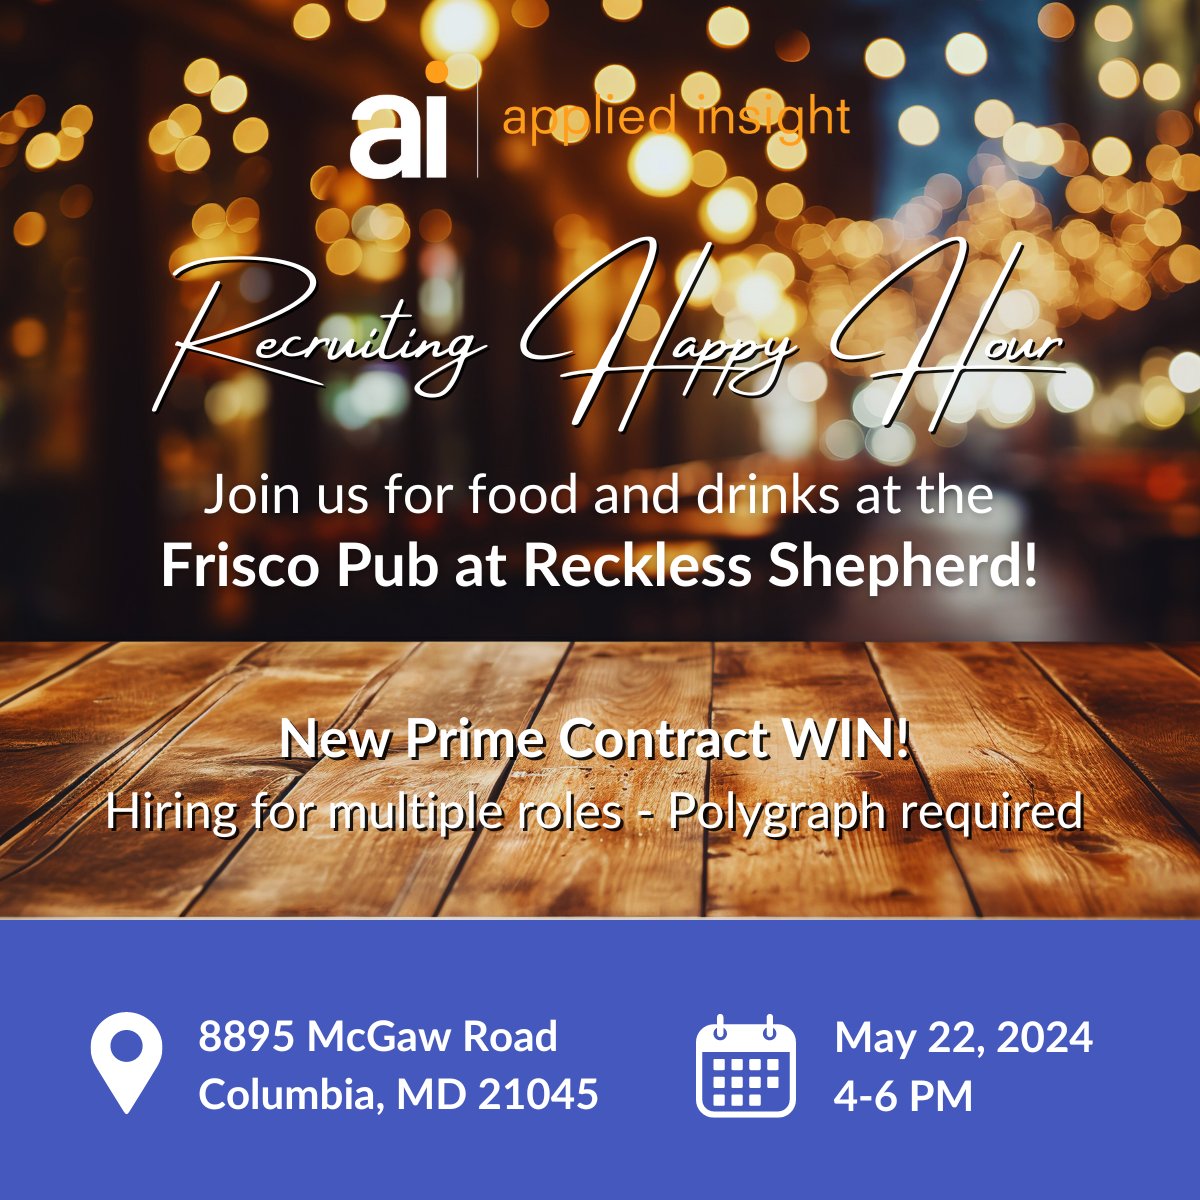 Join us tomorrow at the Frisco Pub at Reckless Shepherd from 4-6PM for Recruiting Happy Hour! 🎉 We're hiring #Developers, #CyberEngineers, and more! Network and explore new opportunities with us! See all #jobs here - hubs.ly/Q02xYvwN0 🚀 Polygraph required. #GovCon #IC